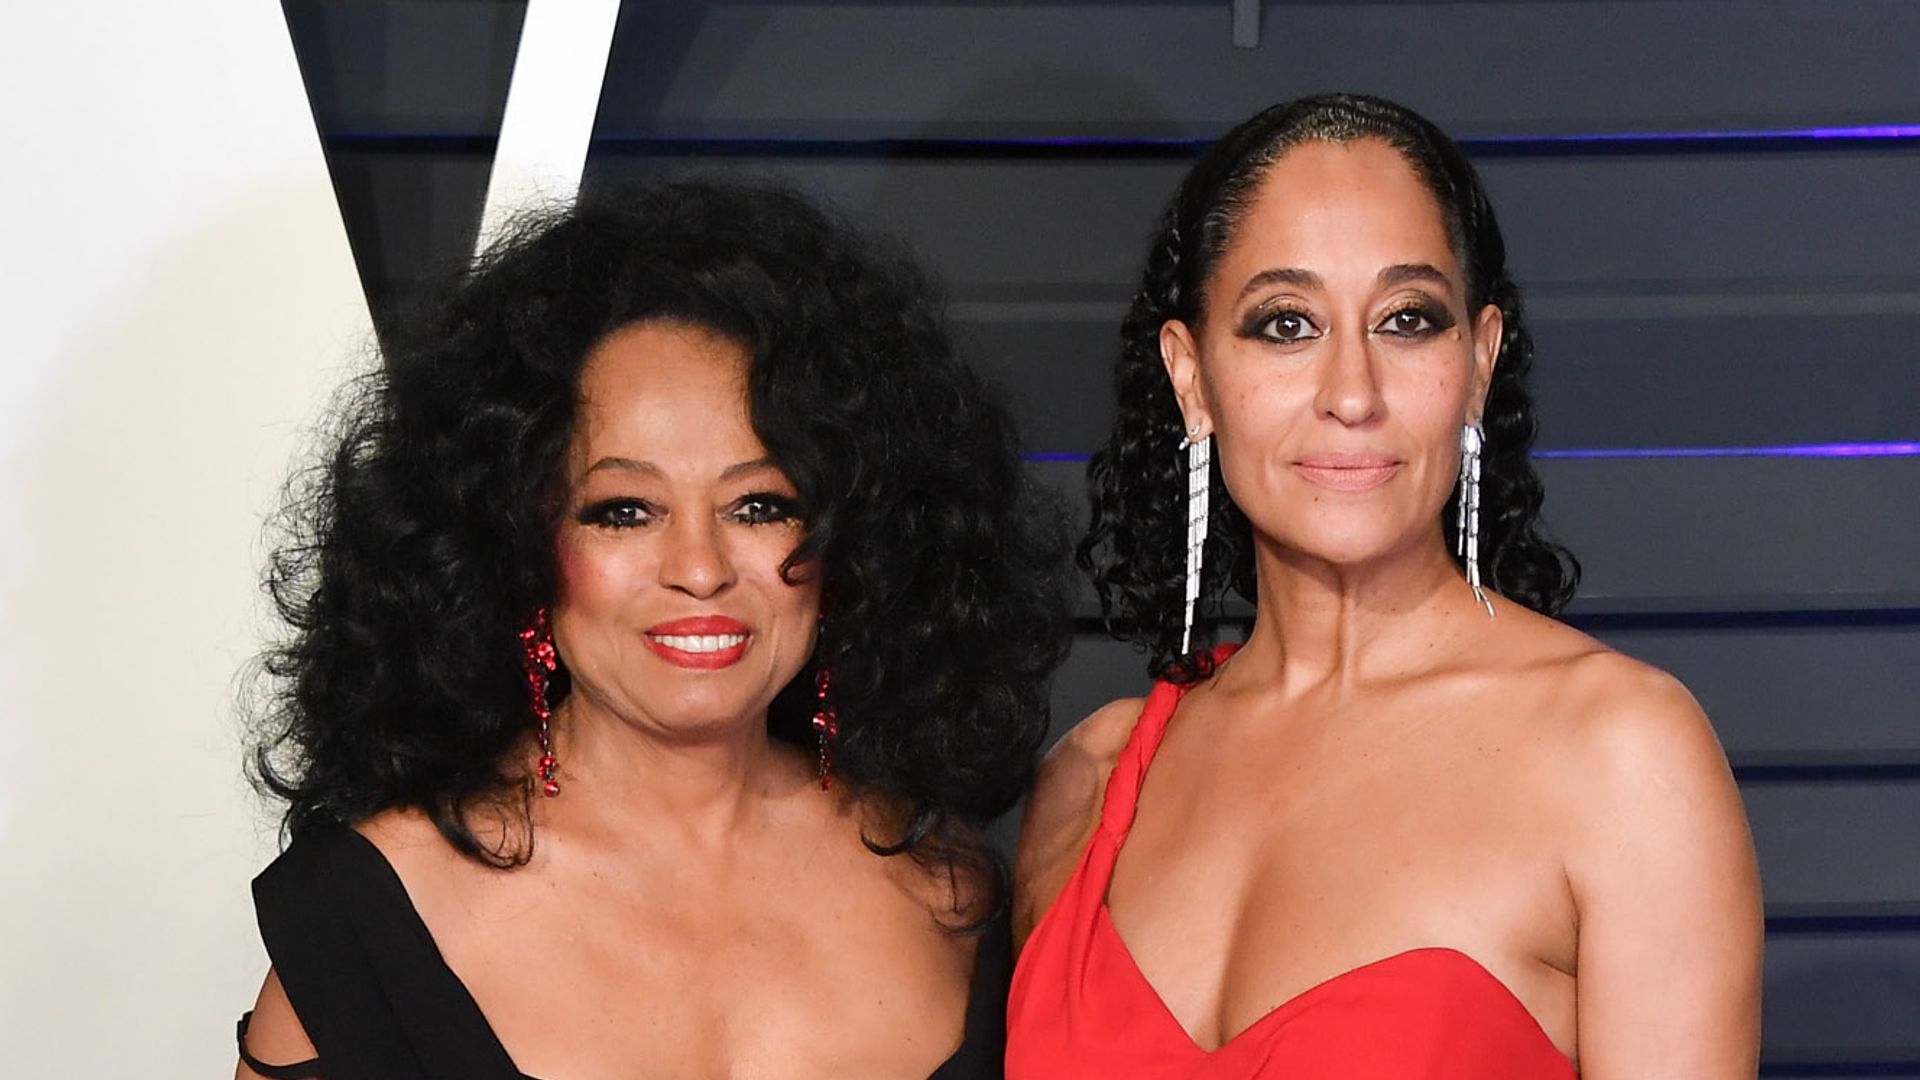 Diana Ross and Tracee Ellis Ross attend the 2019 Vanity Fair Oscar Party hosted by Radhika Jones at Wallis Annenberg Center for the Performing Arts on February 24, 2019 in Beverly Hills, California.